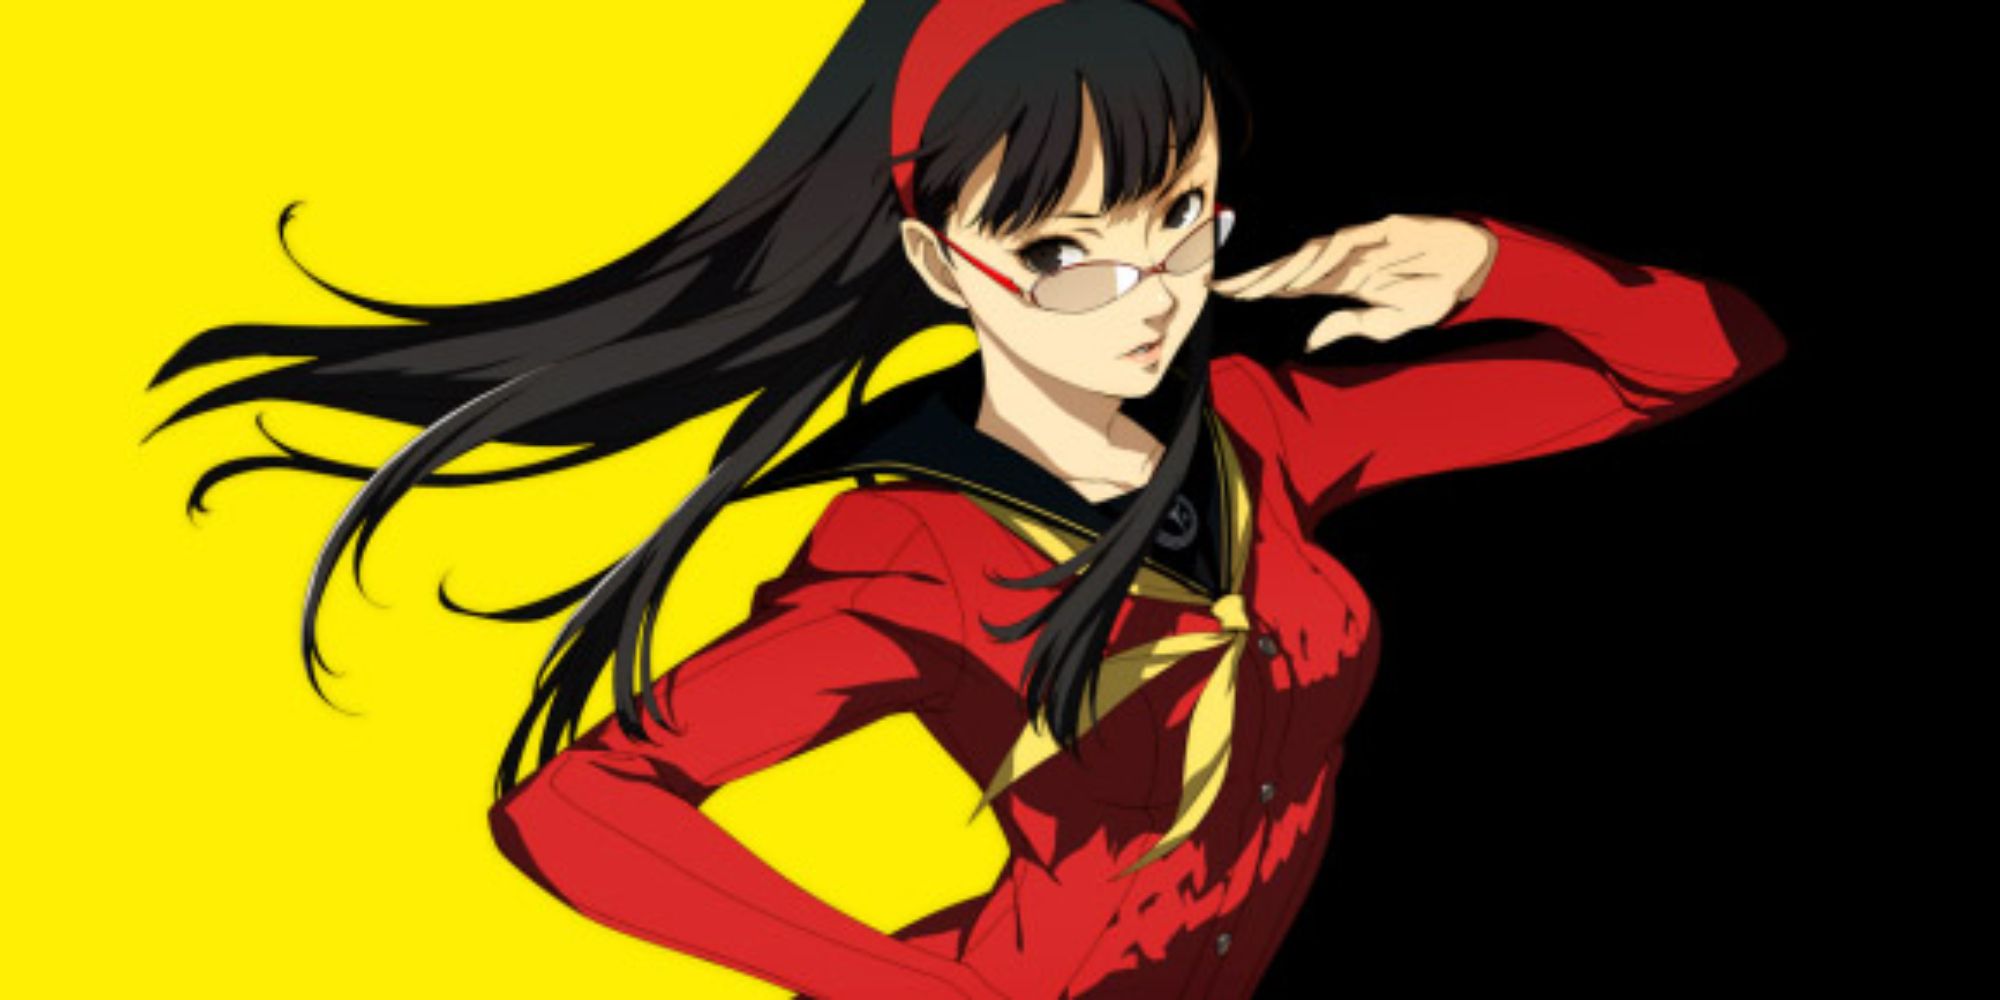 character art for Yukiko Amagi from Persona 4 Golden against a black and yellow background